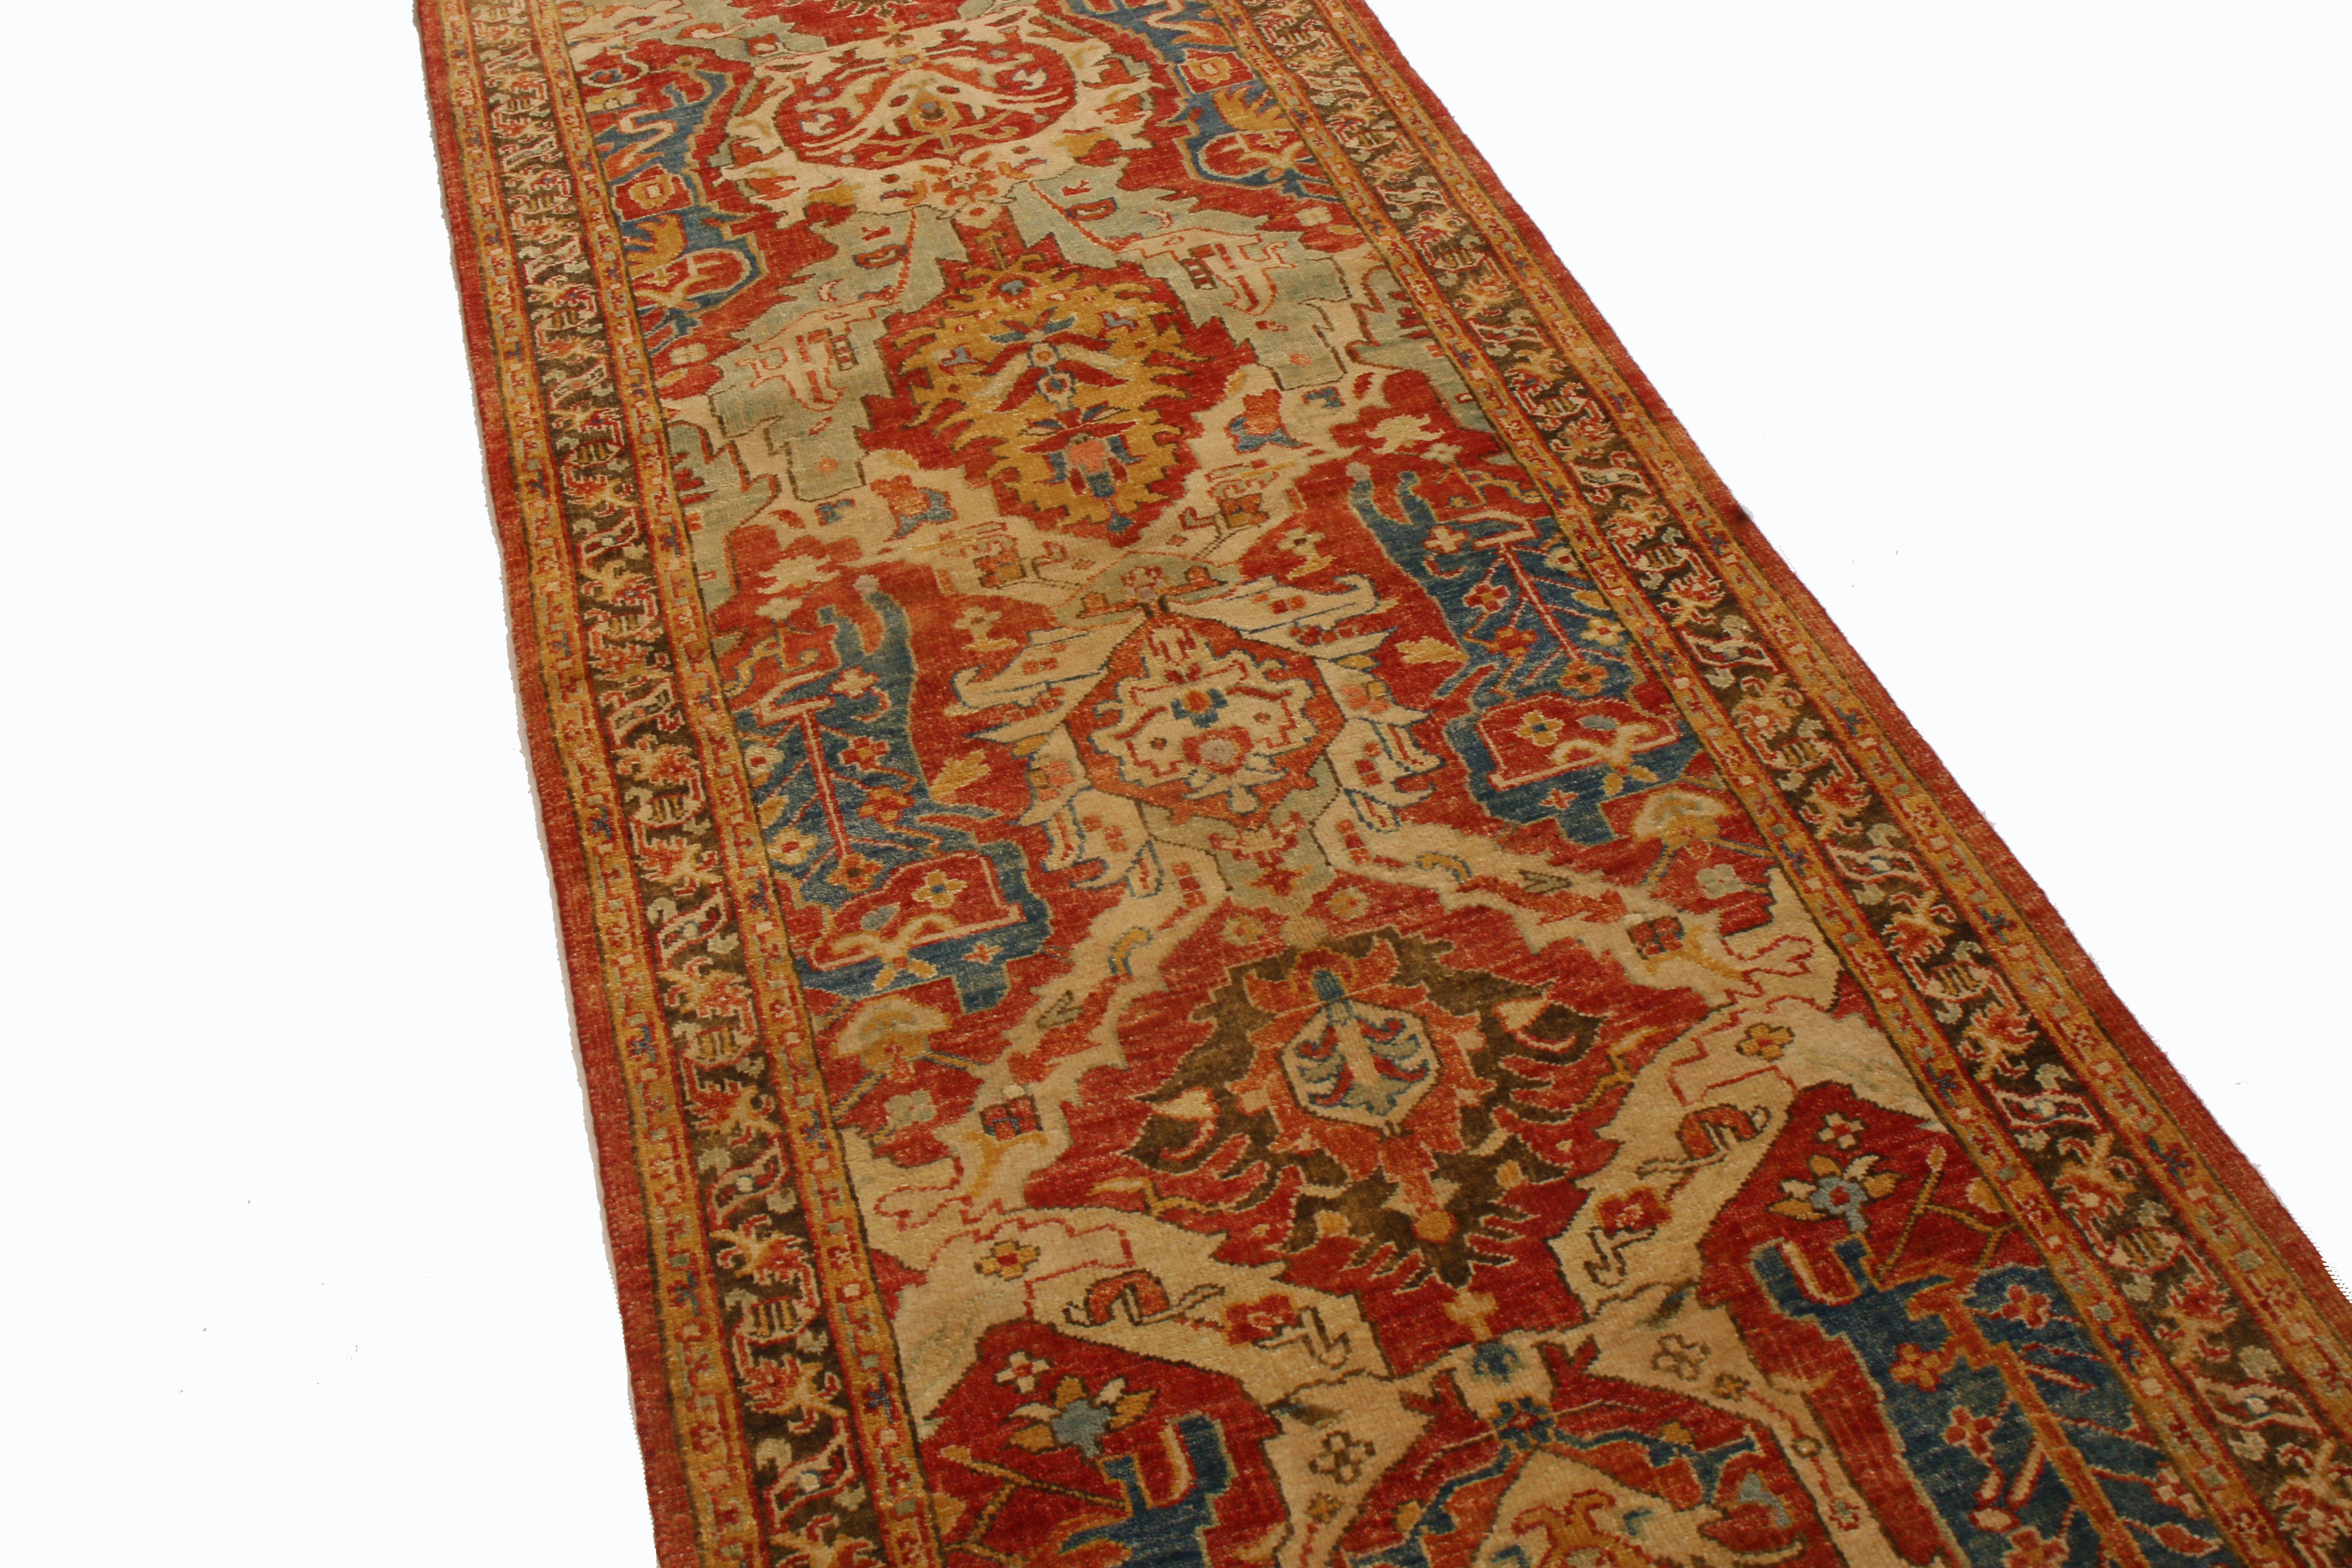 Originating from India in 2010s, this new Agra wool runner features interesting complementary symbols in its field design. Hand knotted in high quality wool, the field design employs a vertically symmetrical tower of lotus, palmette and tree